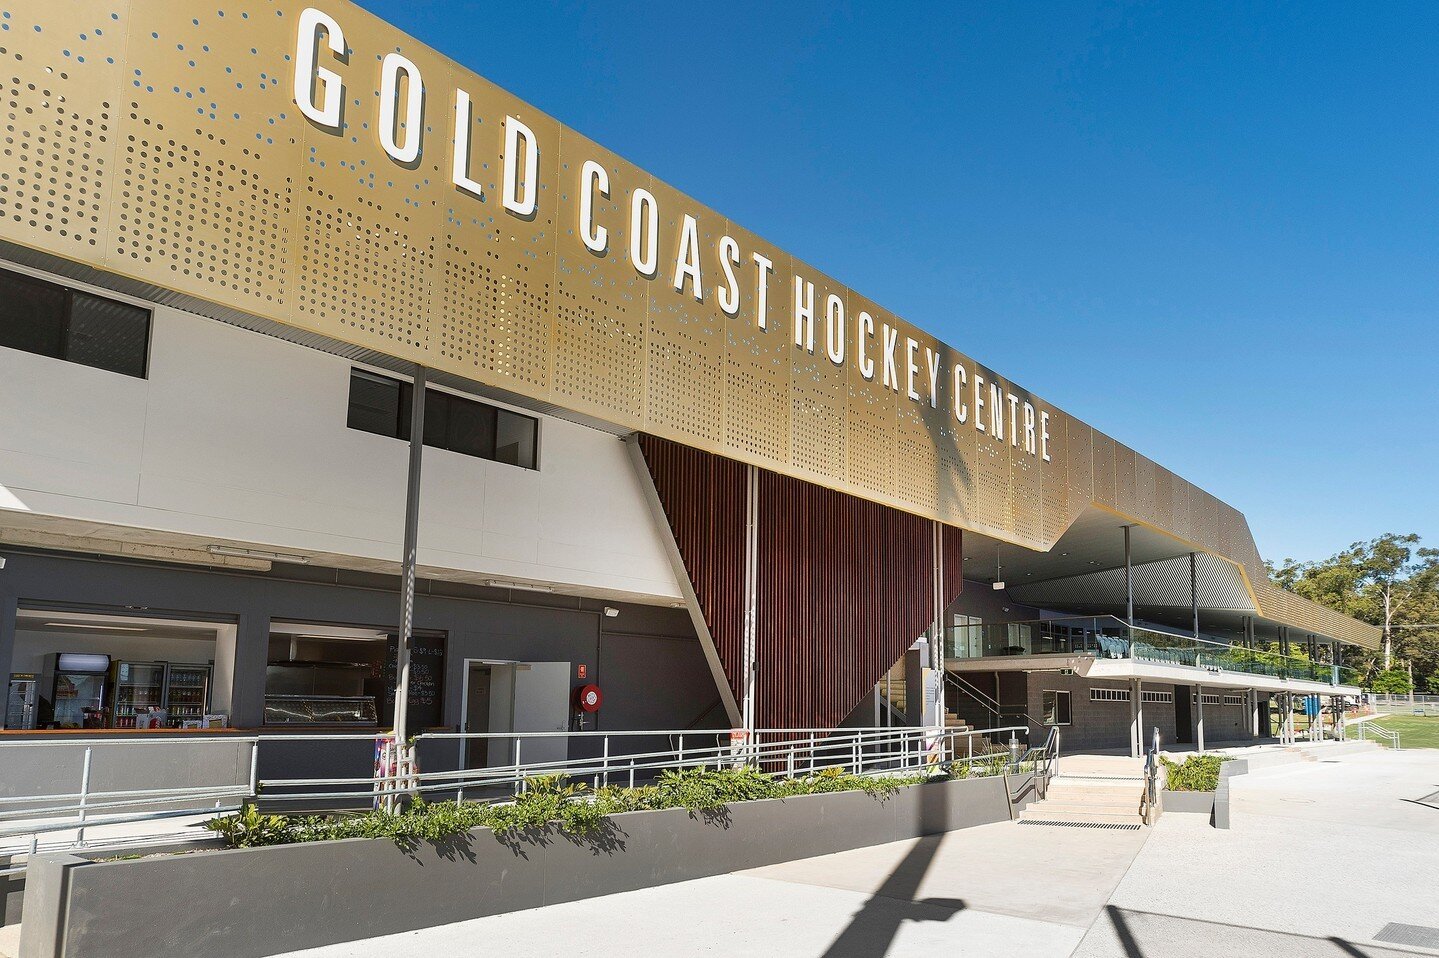 GC Hockey Centre // MODE was engaged to deliver an international standard venue for the Gold Coast 2018 Commonwealth Games. The⁠
centre provides hockey facilities of an international competition and training standard, with two world class synthetic p